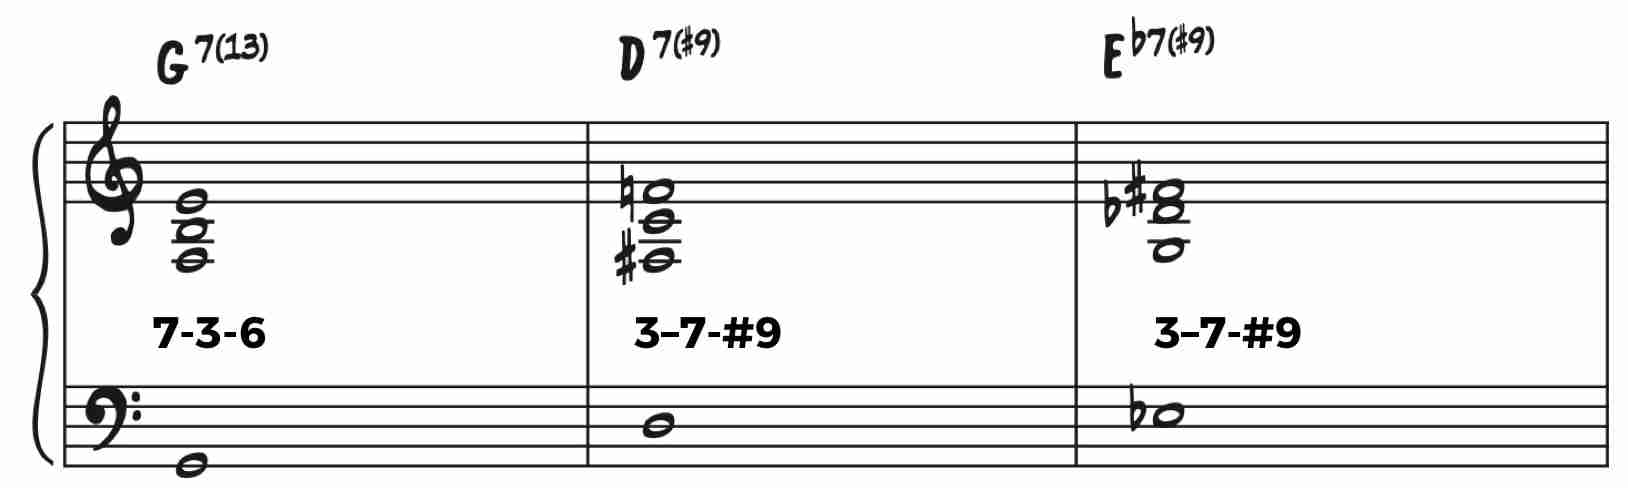 All Blues Chord Voicings